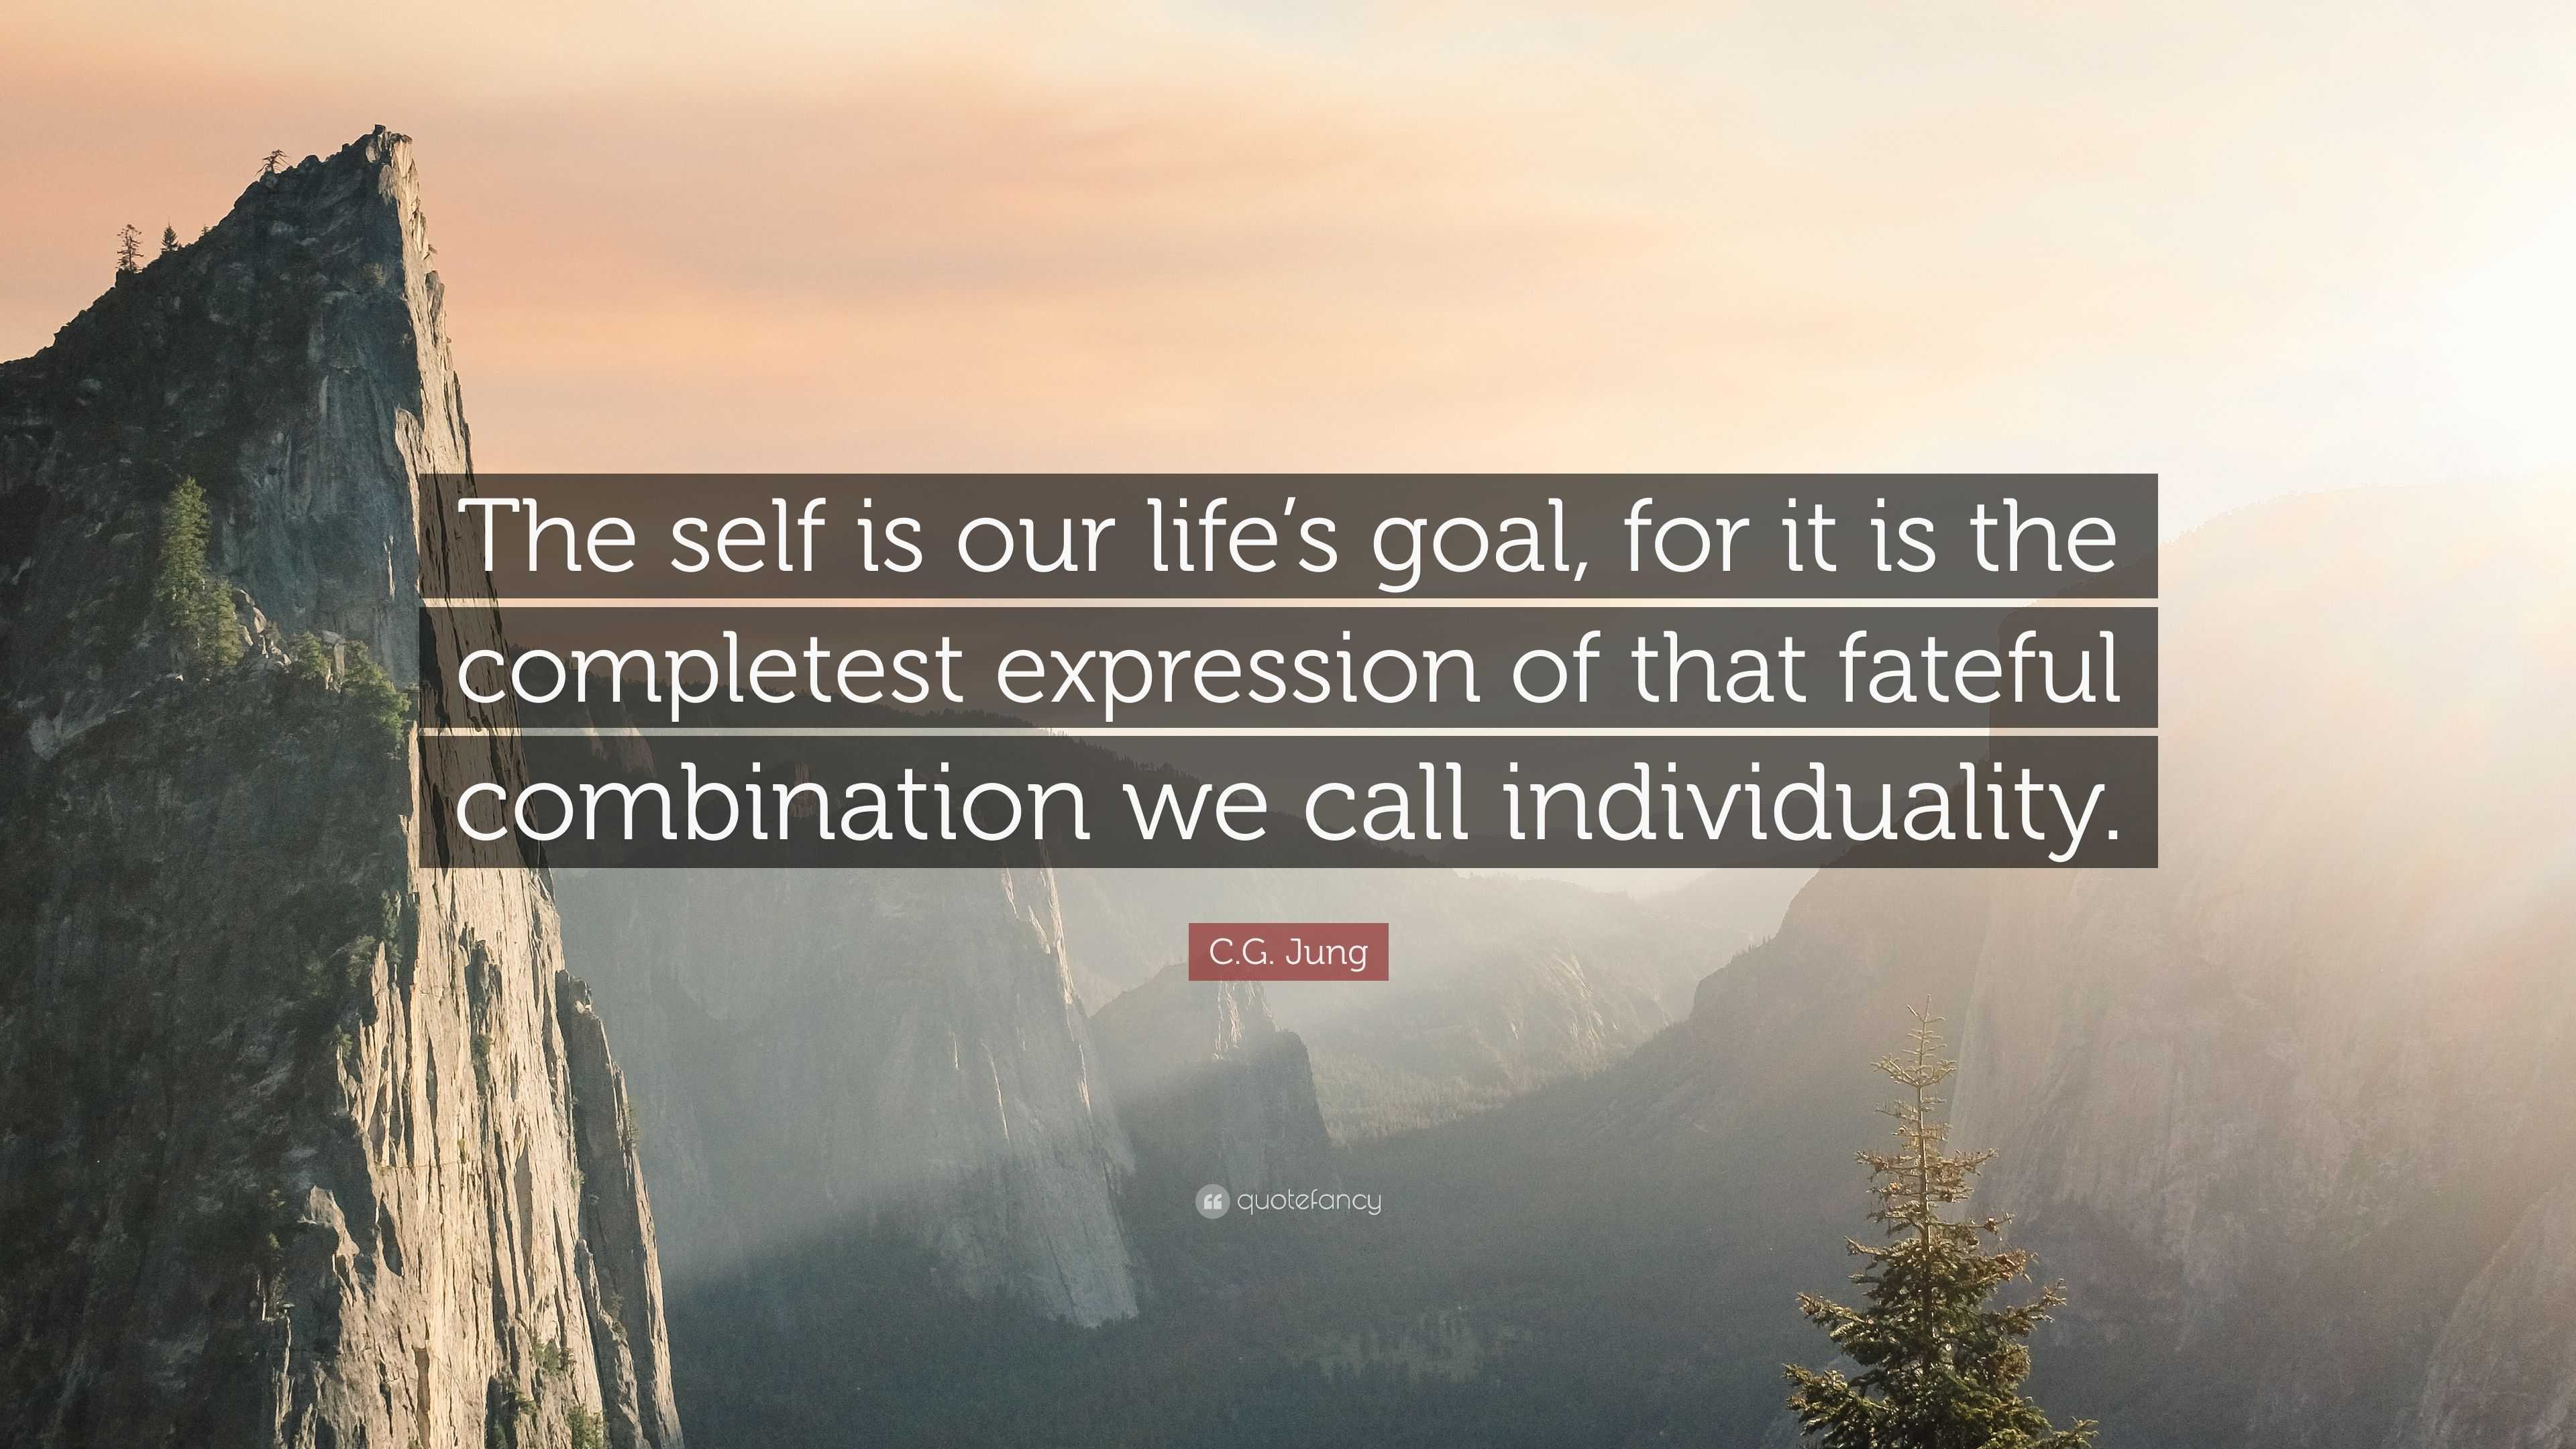 C.G. Jung Quote: “The self is our life’s goal, for it is the completest ...